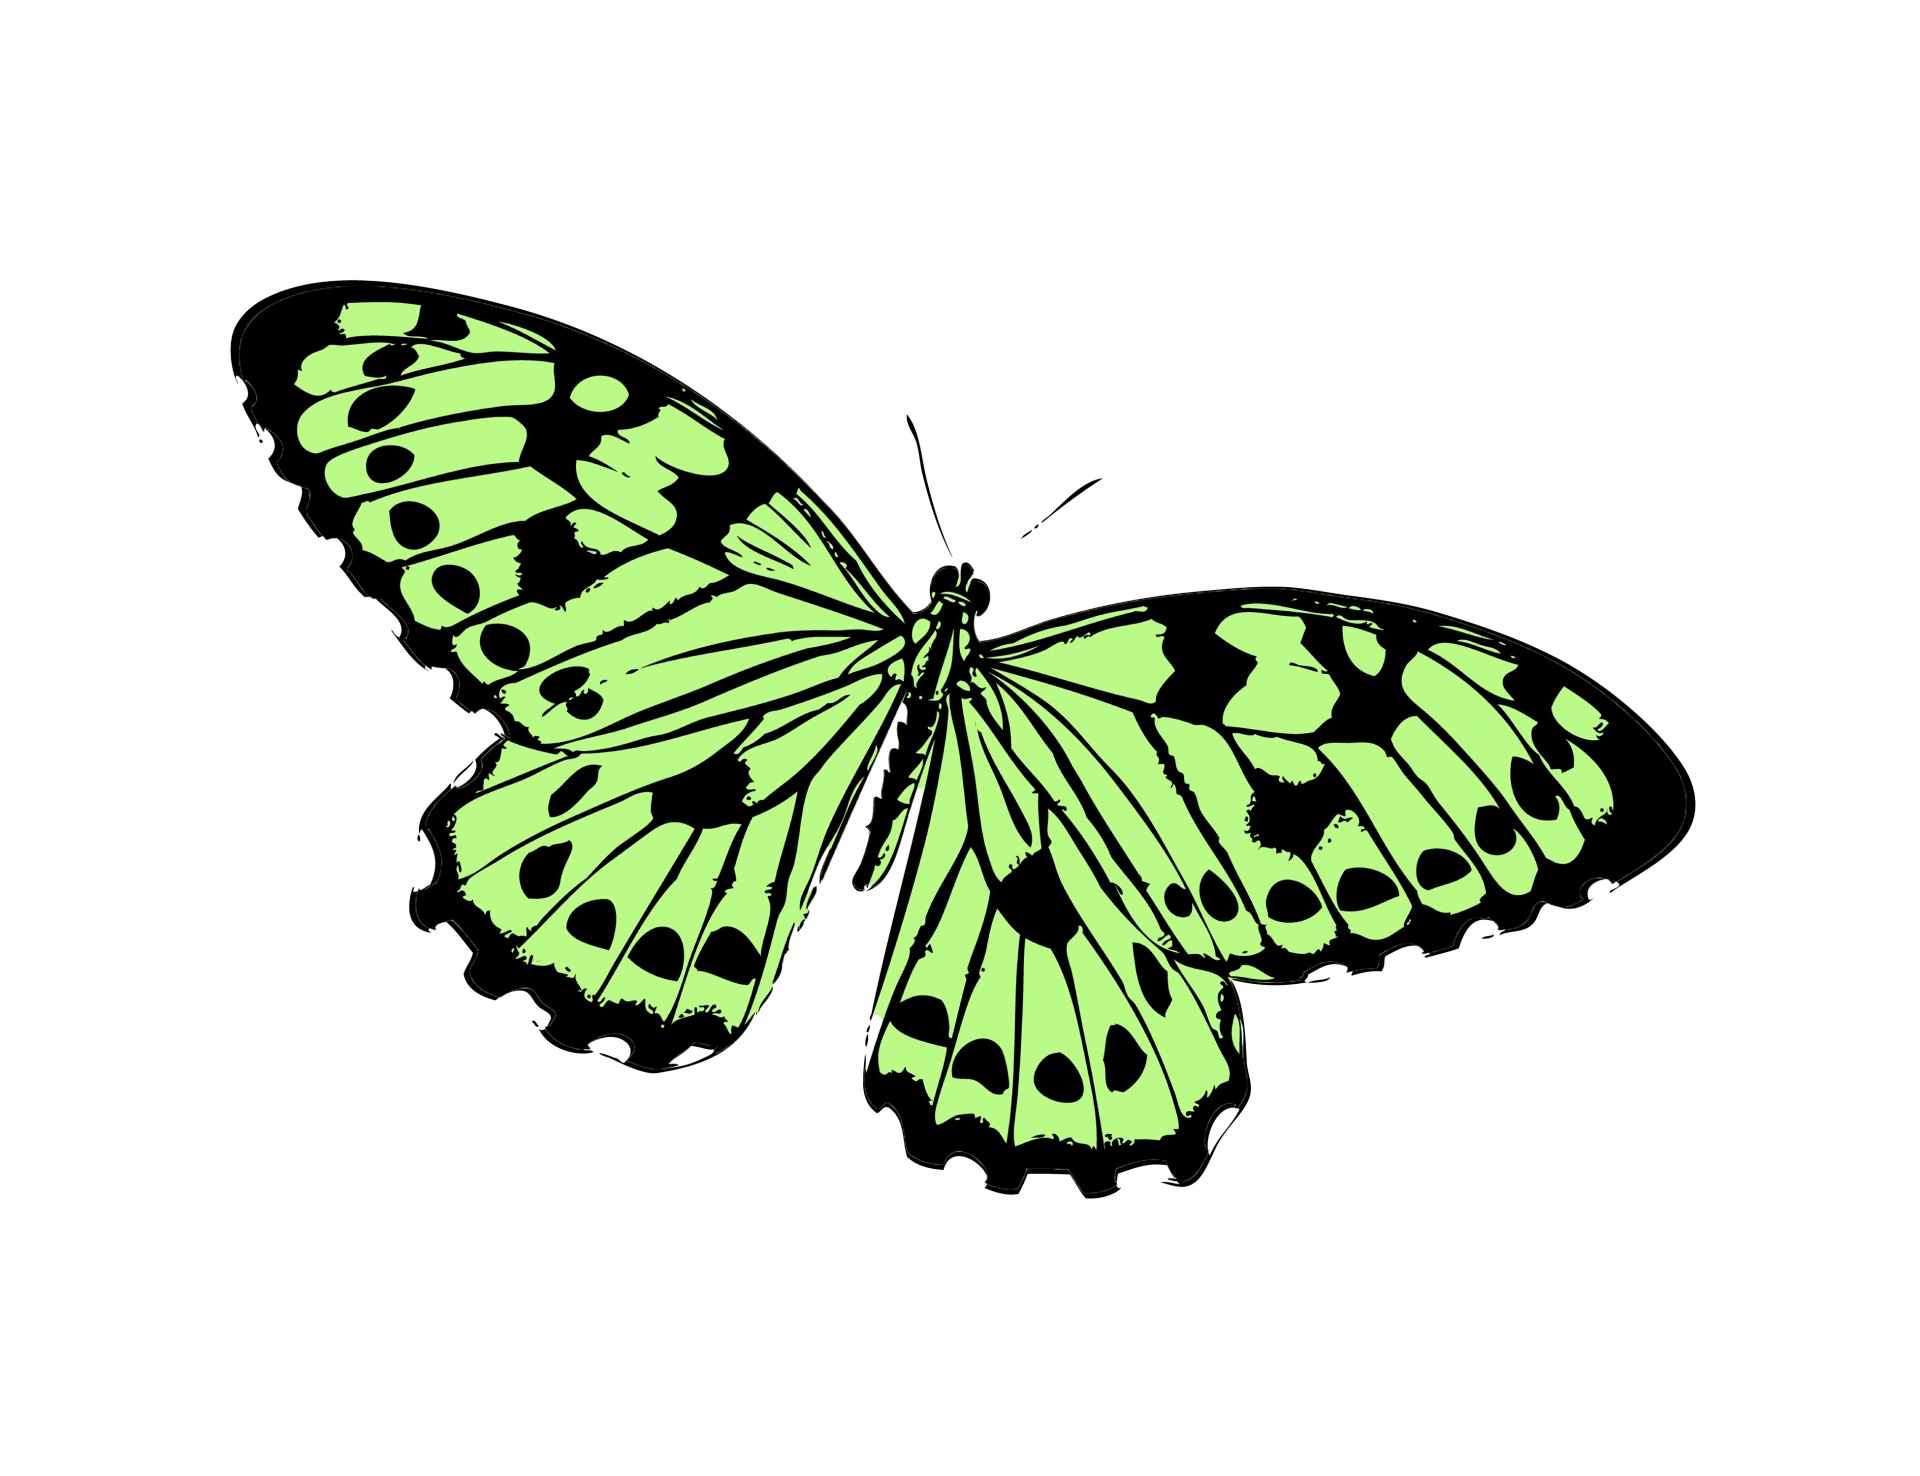 Butterflygreenclipartillustrationnature free photo.